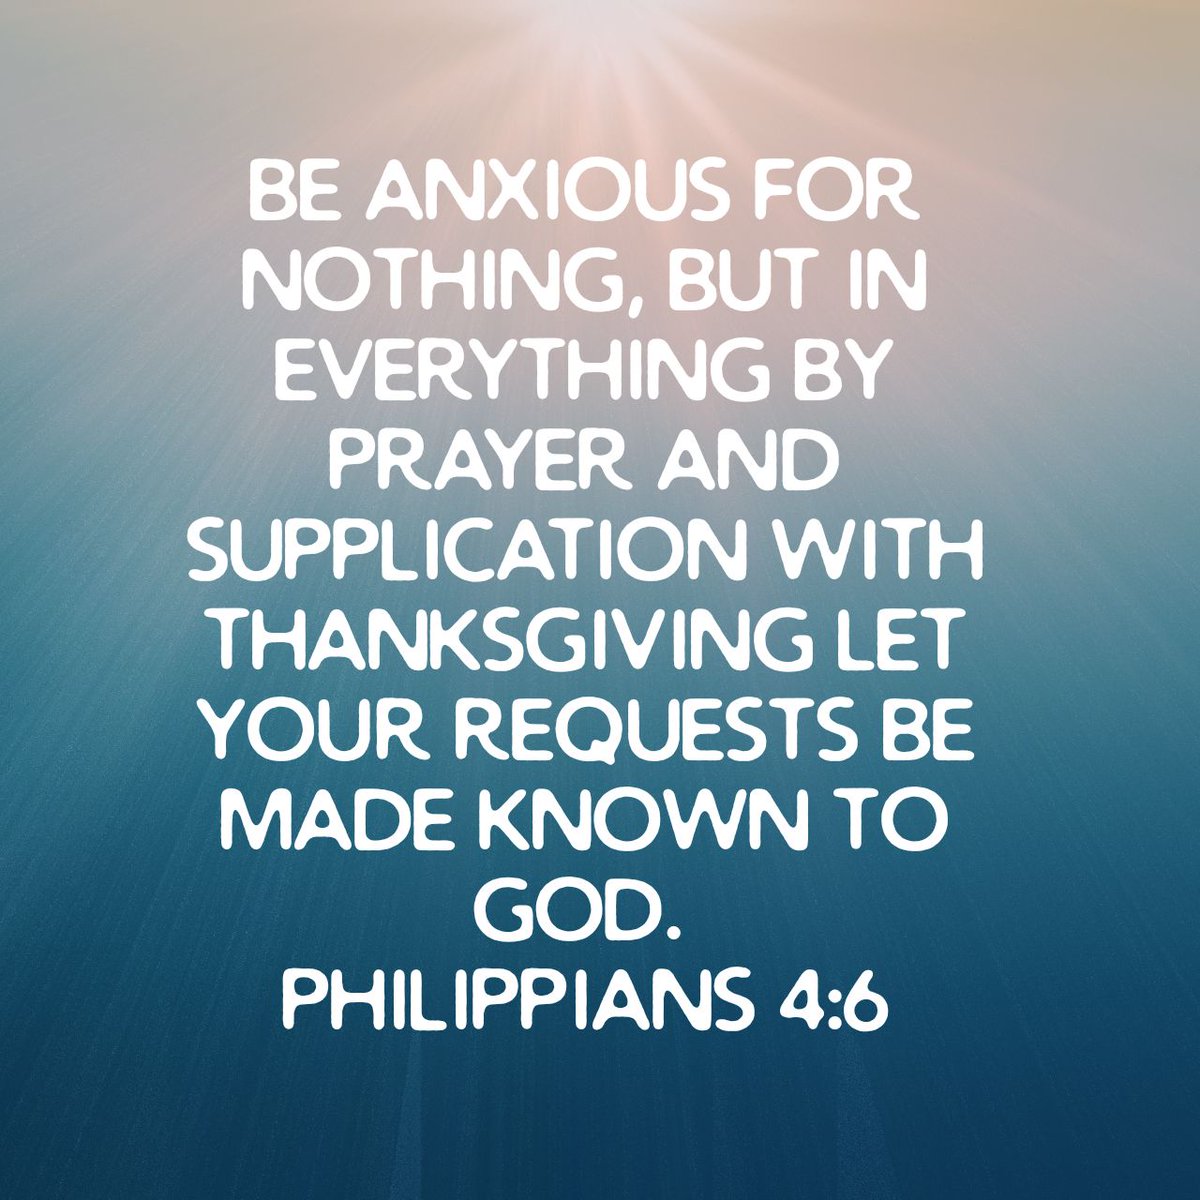 Be anxious for nothing, but in everything by prayer and supplication with thanksgiving let your requests be made known to God.
Philippians 4:6 NASB1995

bible.com/bible/100/php.…